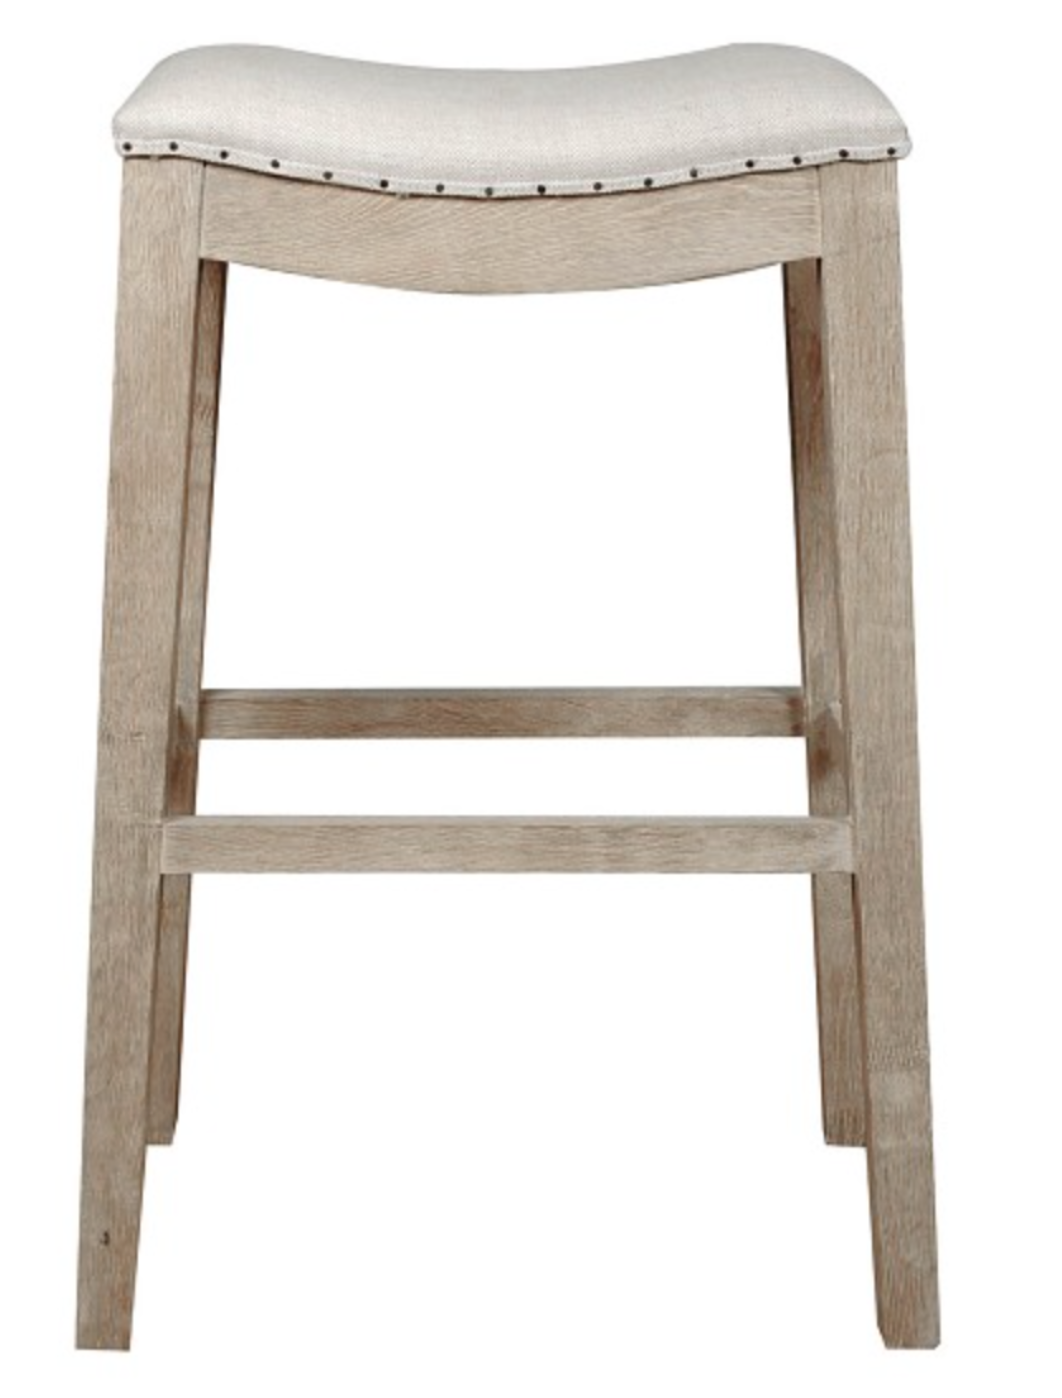 White washed wood bar stool with linen seat, nailhead trim